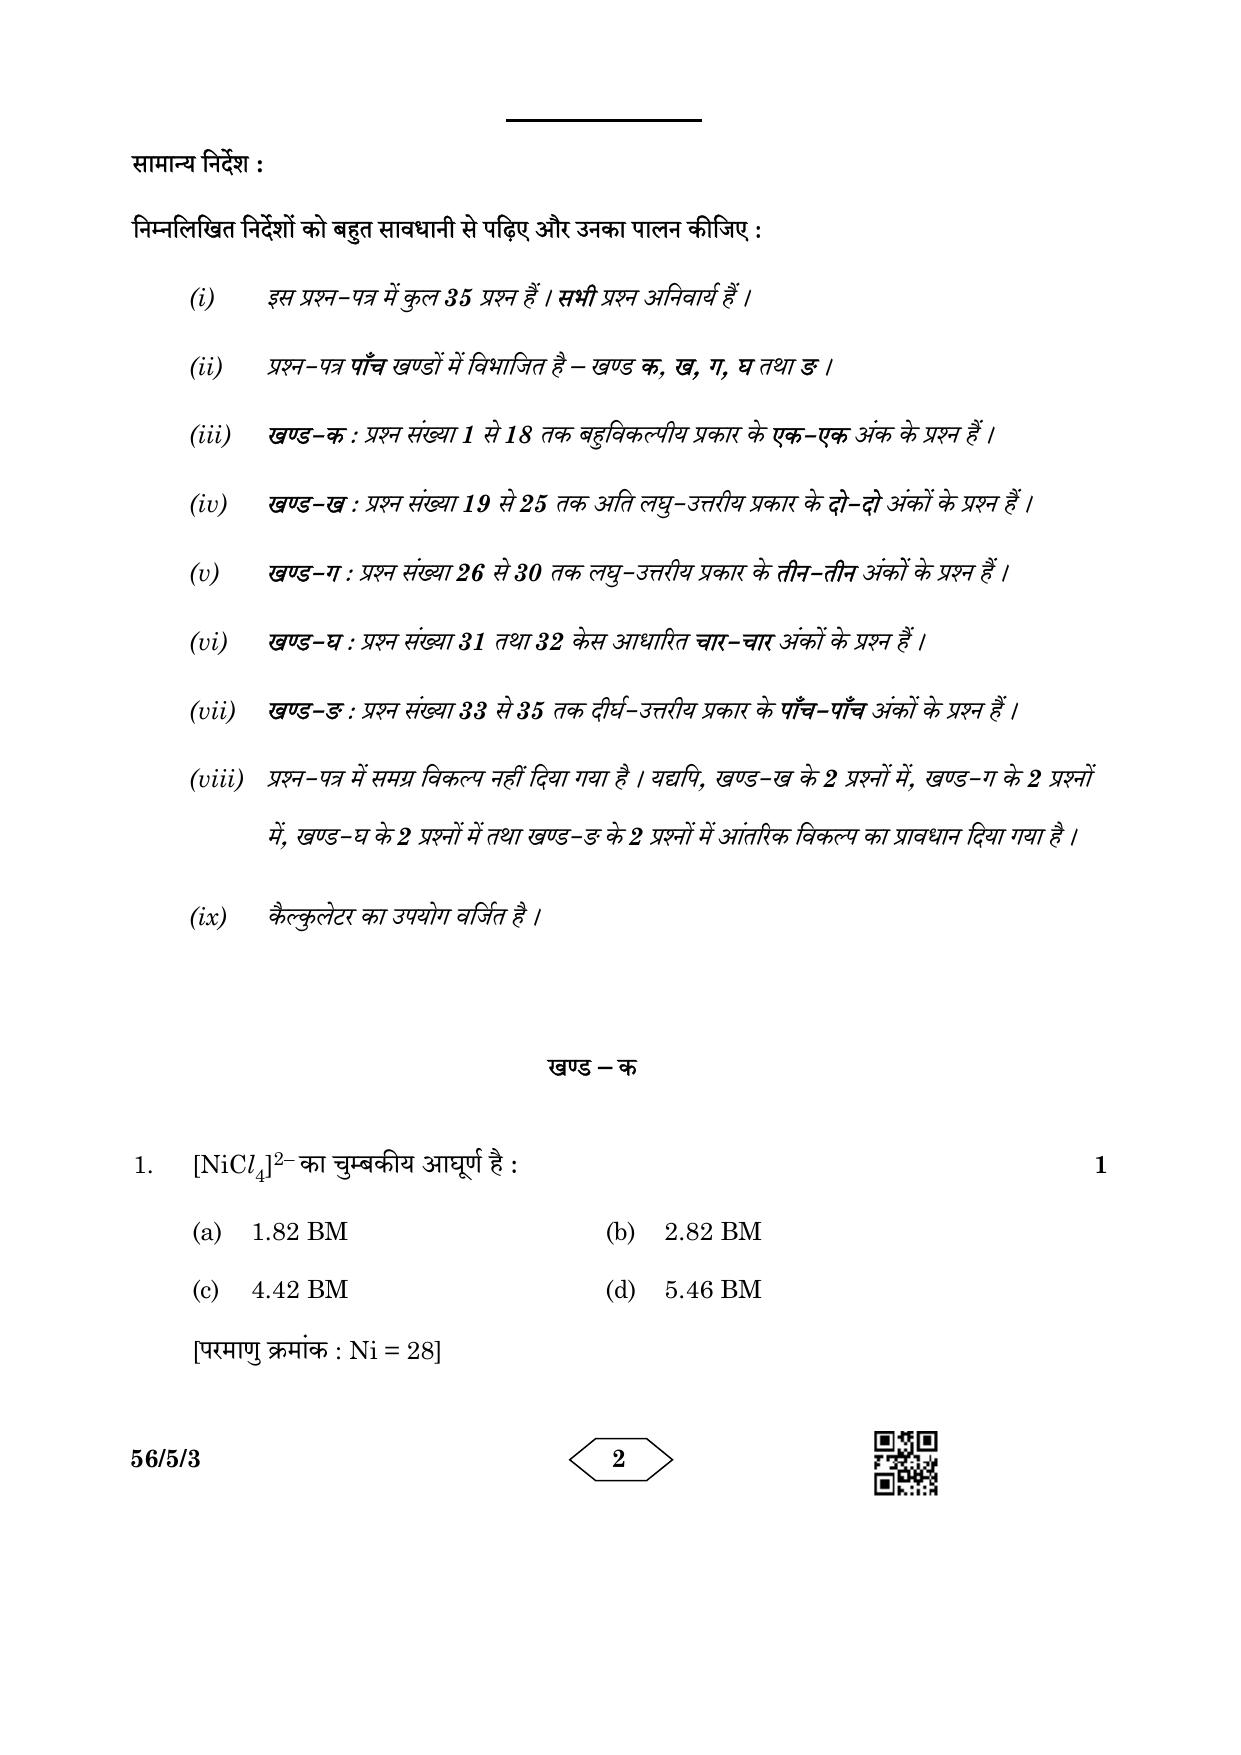 CBSE Class 12 56-5-3 Chemistry 2023 Question Paper - Page 2